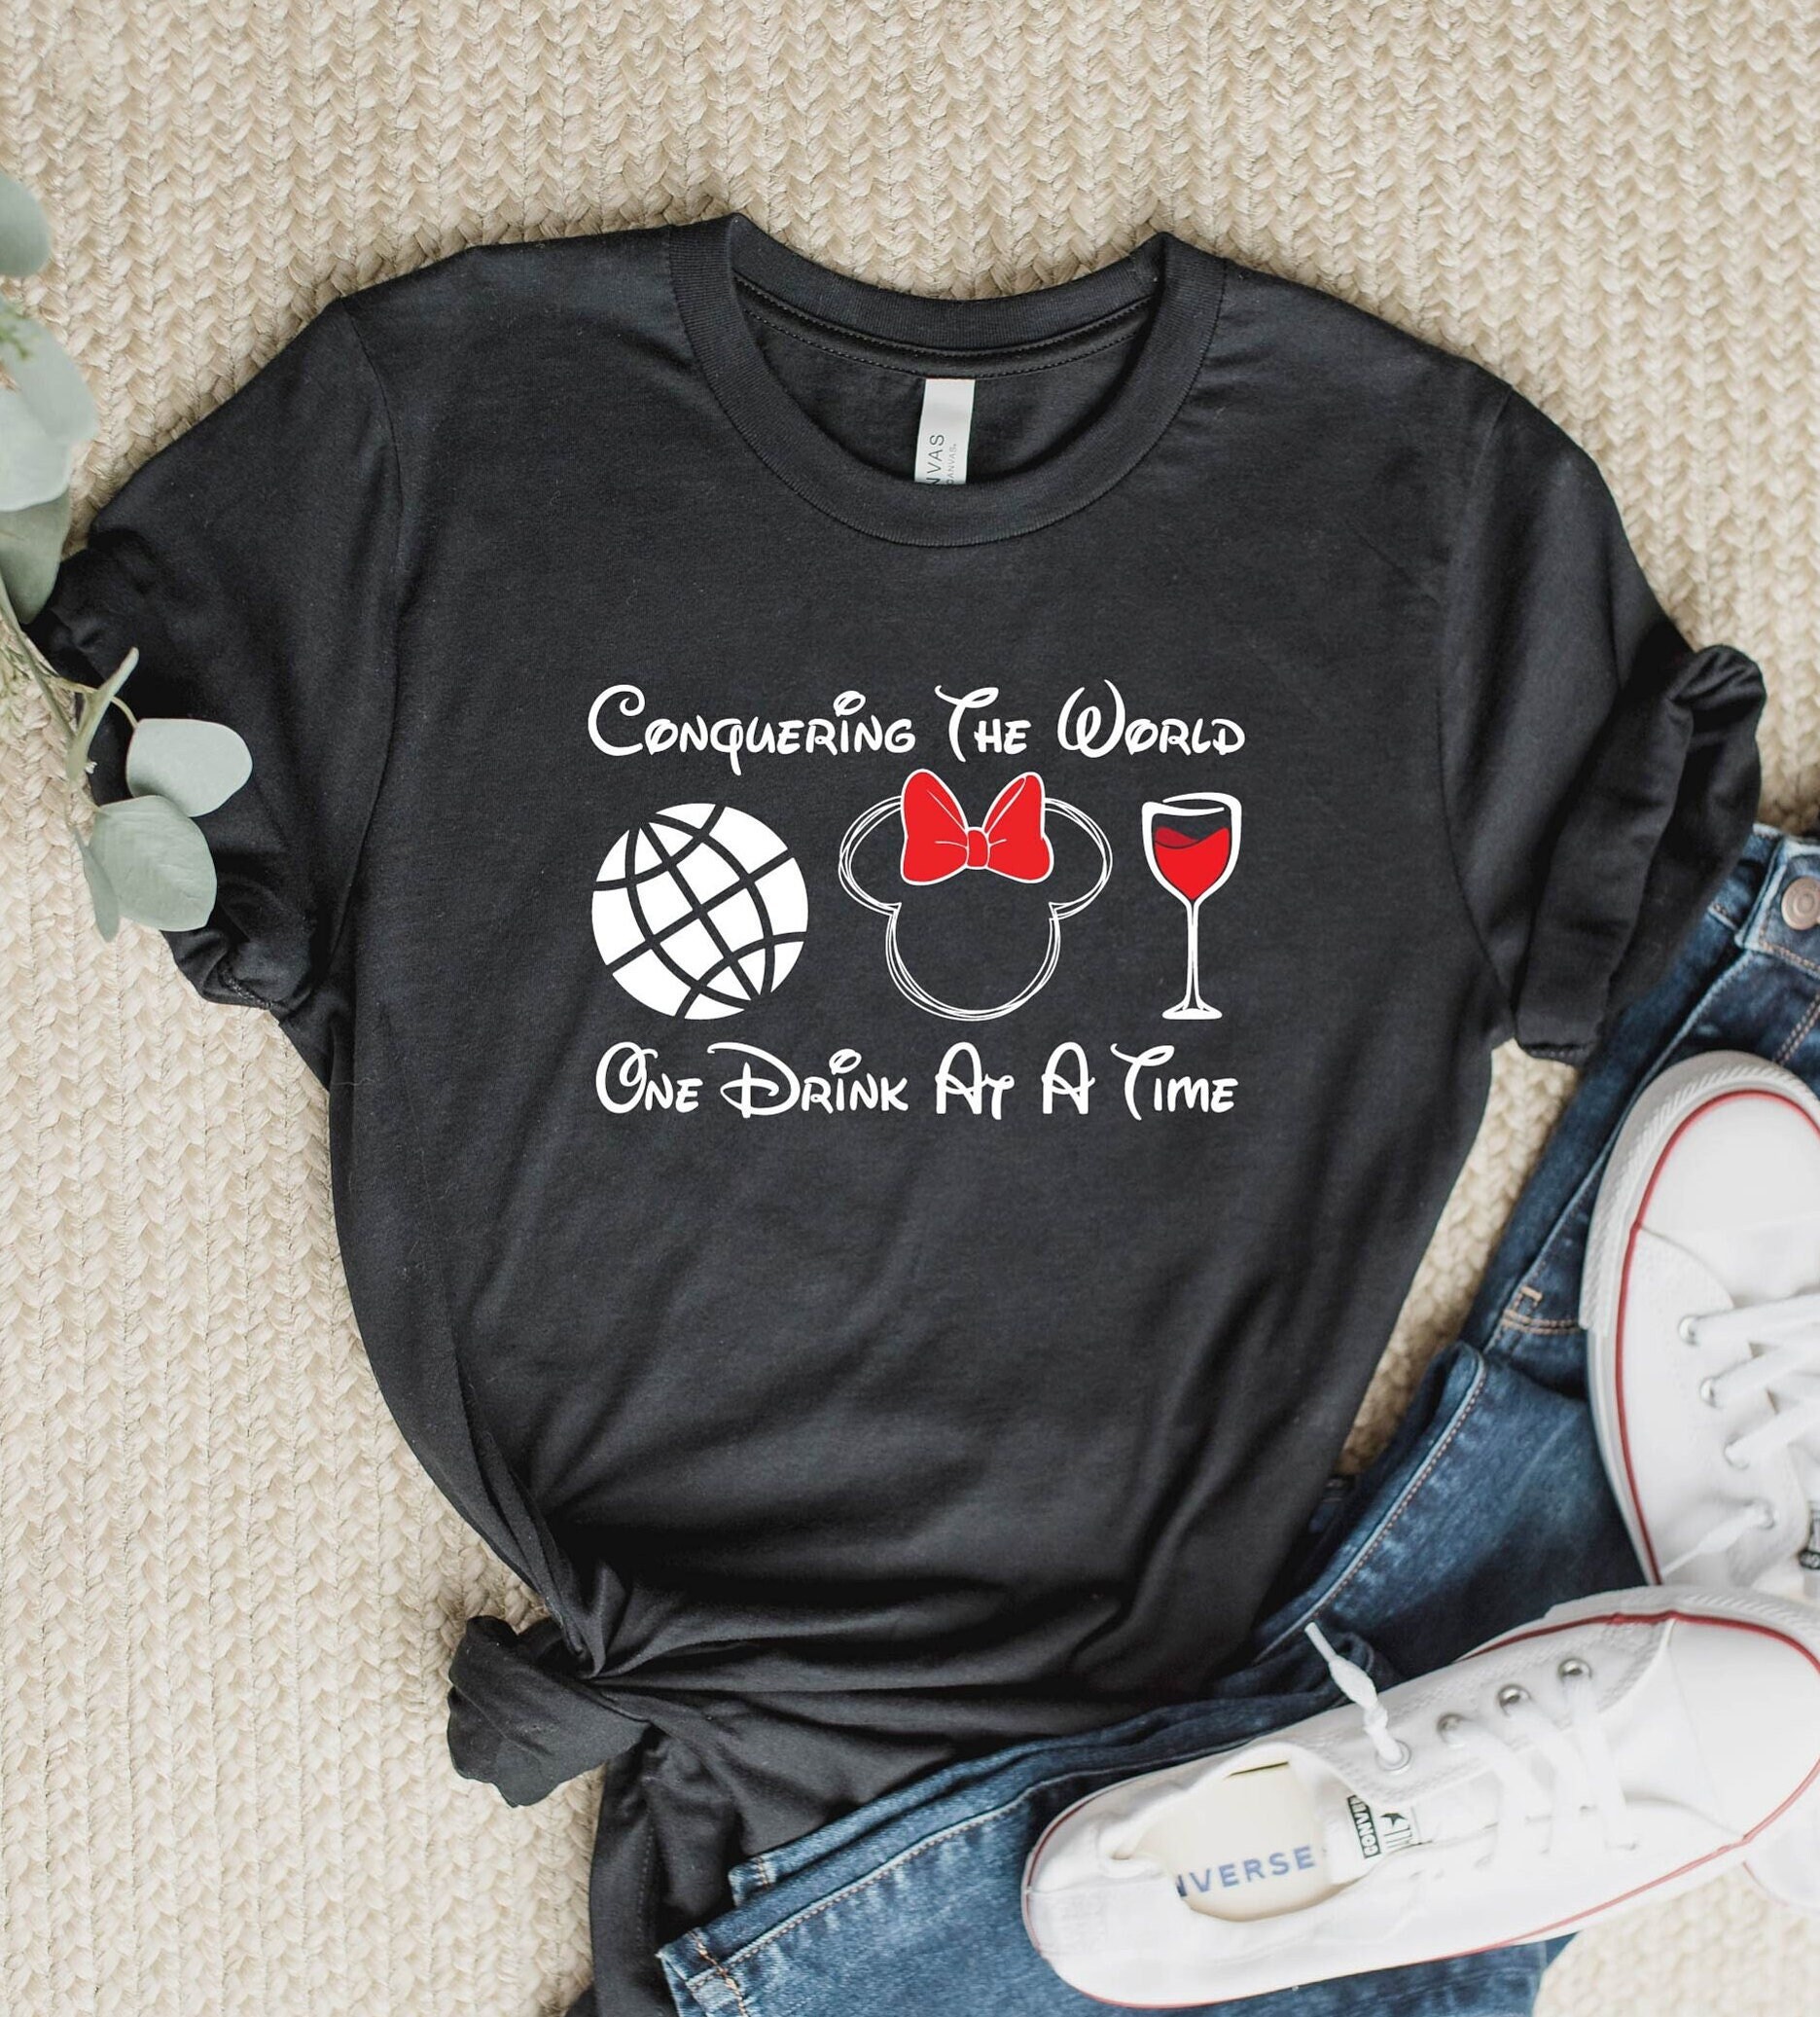 Discover Conquering the World One Drink at a Time Disney T-Shirt